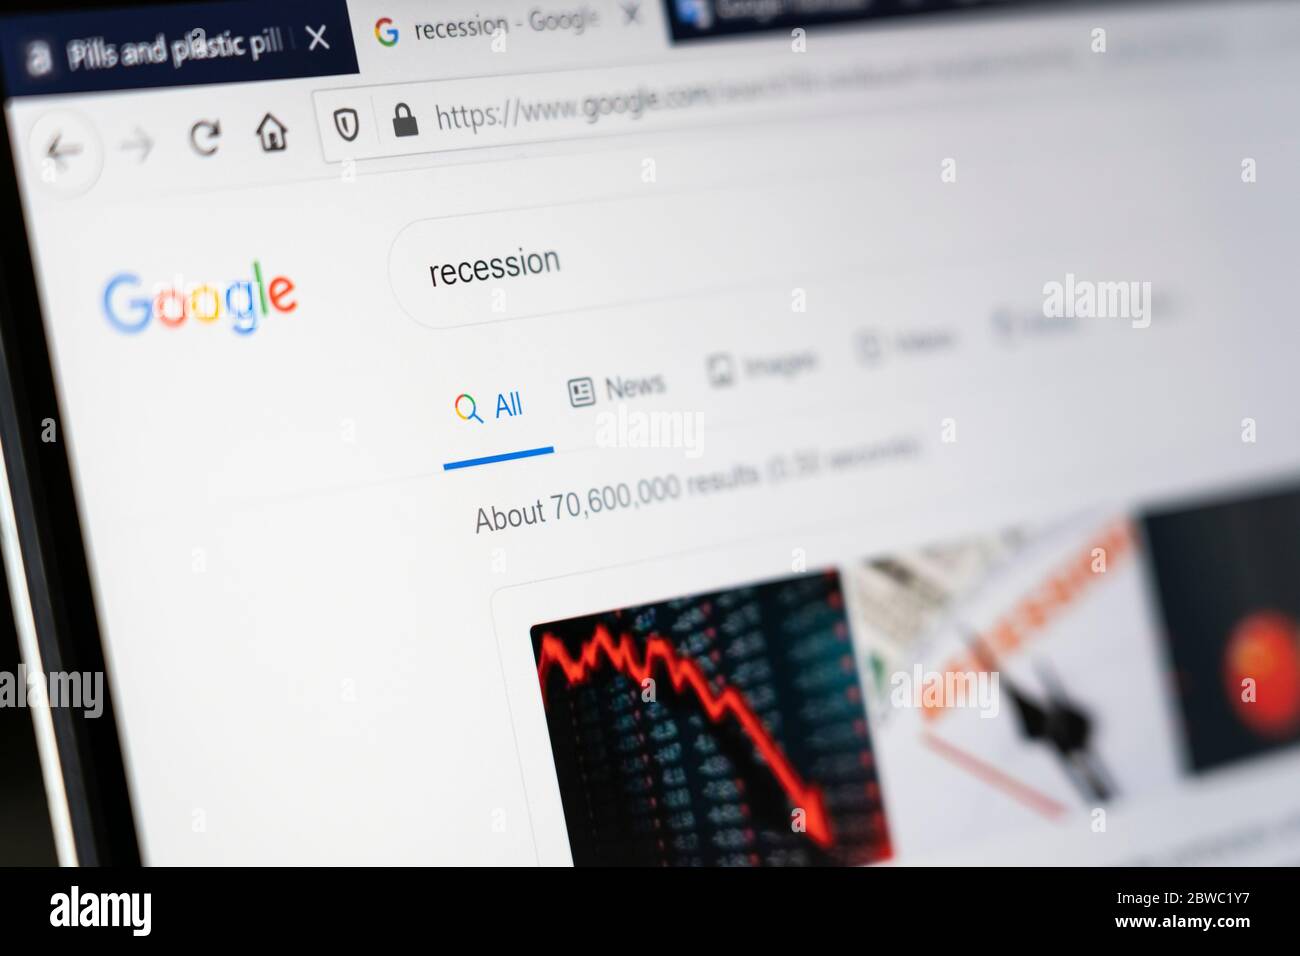 A computer screen showing the word'Recession' as a Google search engine search term with the number of search results shown Stock Photo